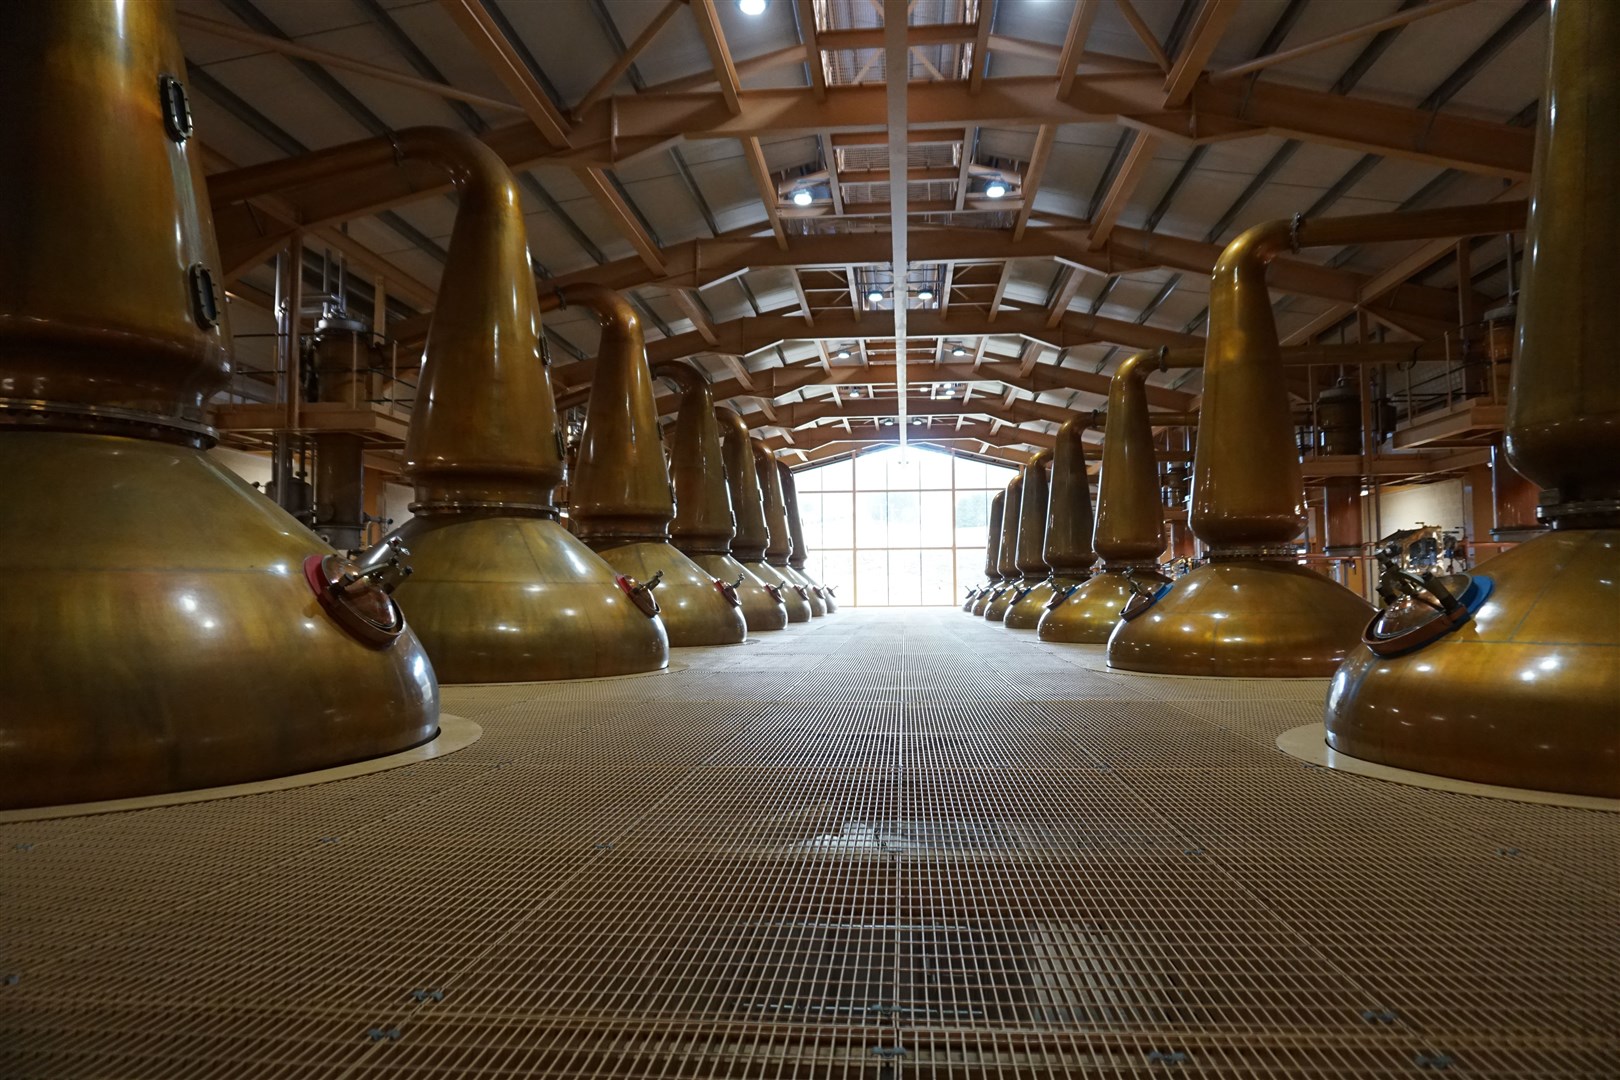 The new stillhouse at Glenlivet allowed the distillery to double its capacity. Picture: Federica Stefani.